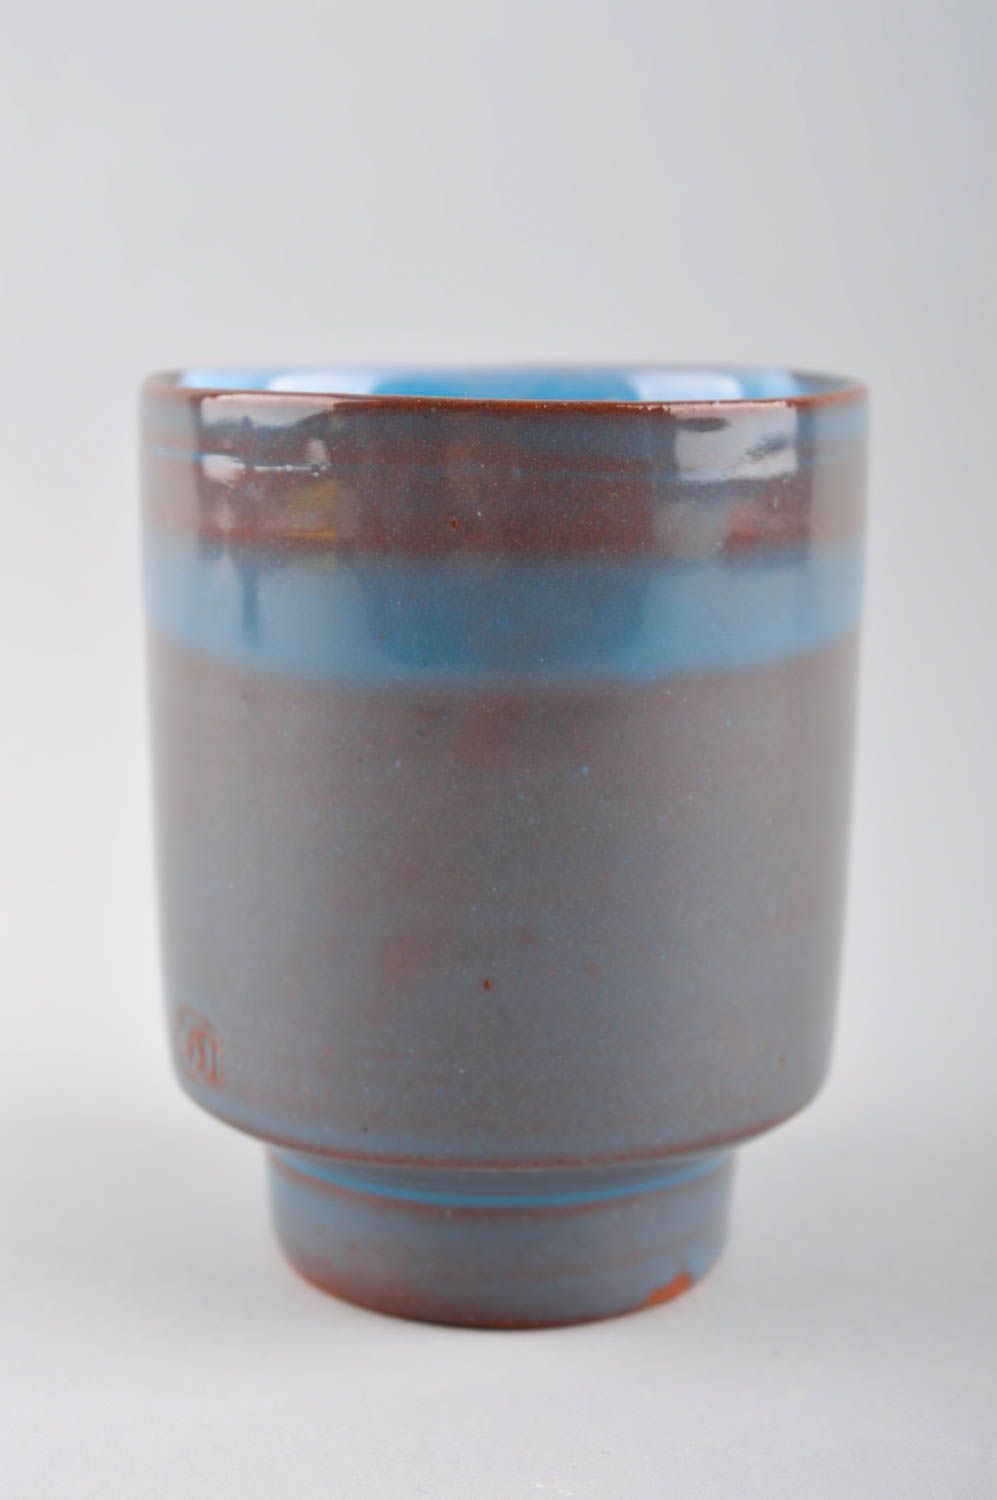 8 oz no handle porcelain cup in grey and blue colors photo 2